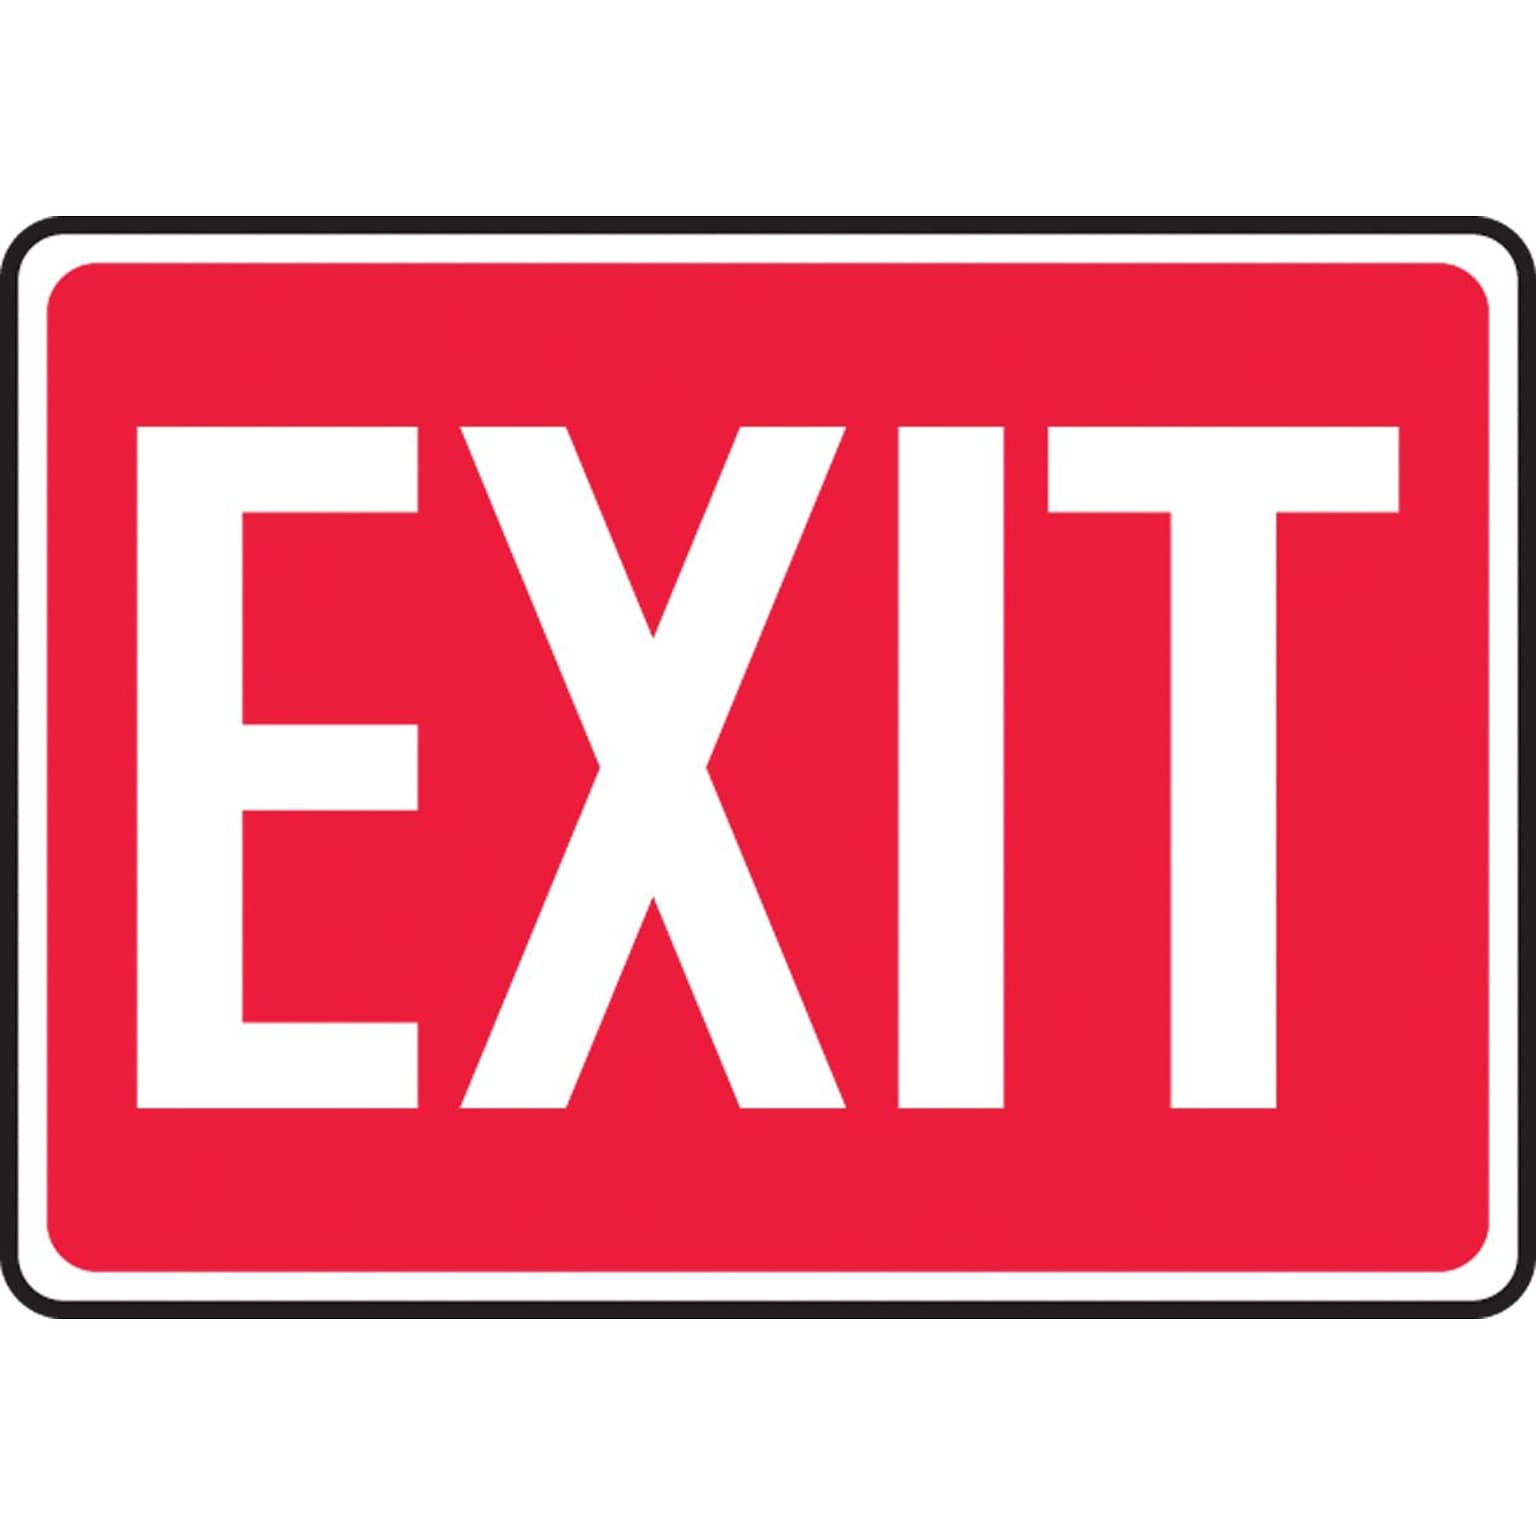 Accuform Signs® 10 x 14 Adhesive Vinyl Safety Sign EXIT, White On Red